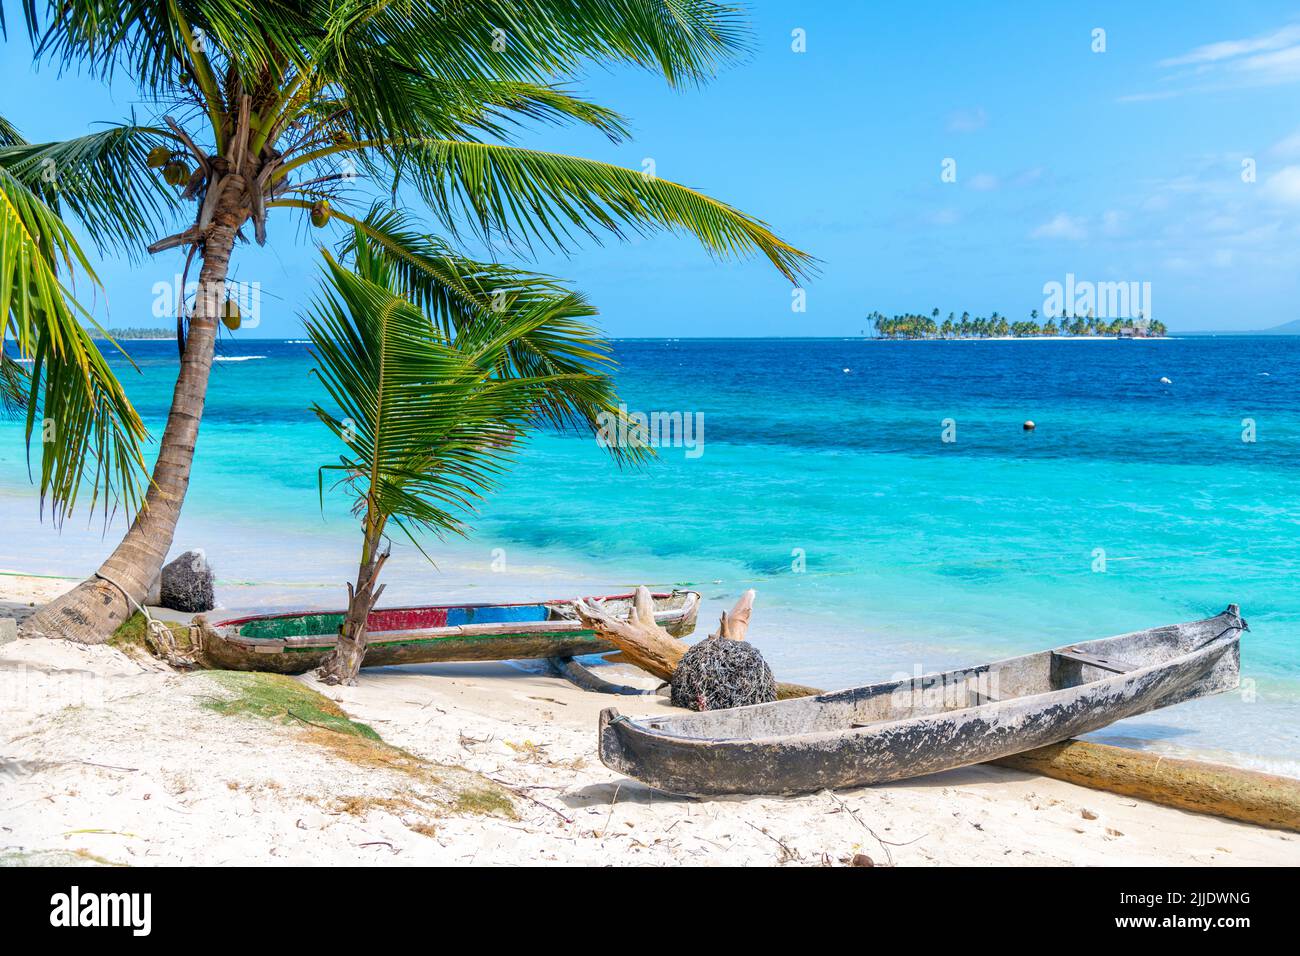 Boats on a beach in the San Blas Islands in Panama Stock Photo